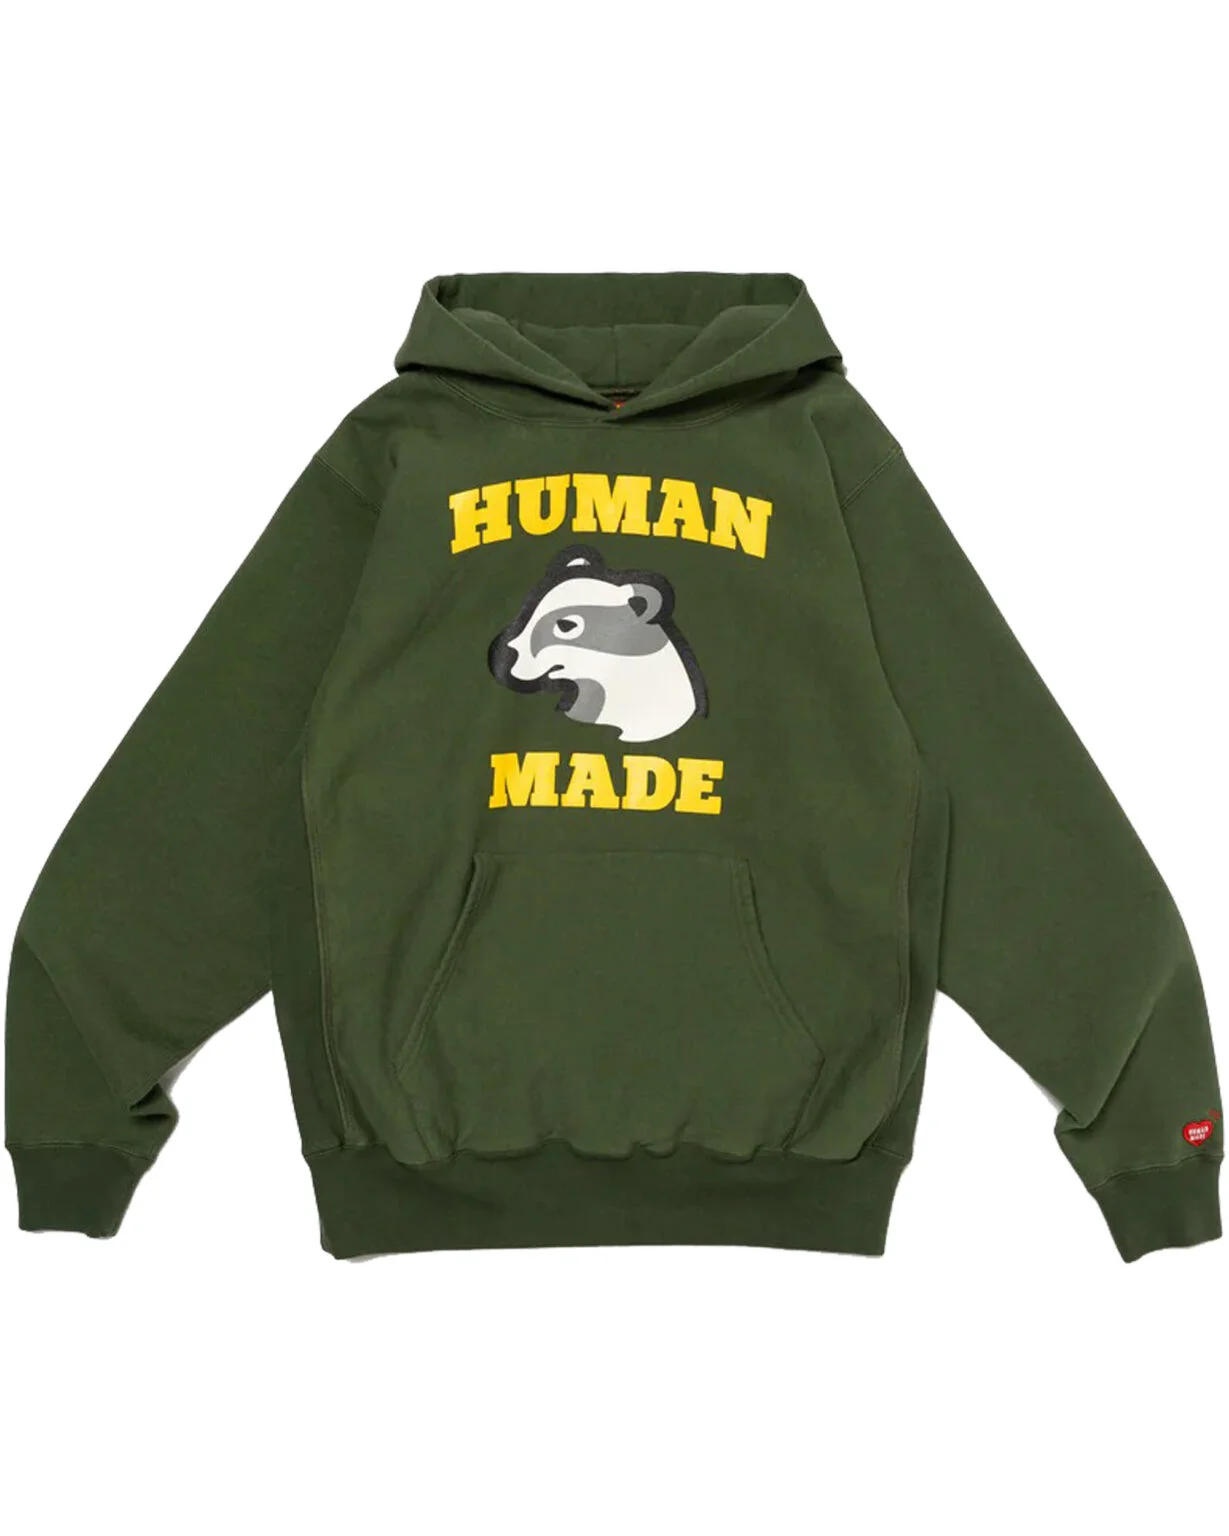 Human Made Bear Hoodie | Official Human Made Clothing Store